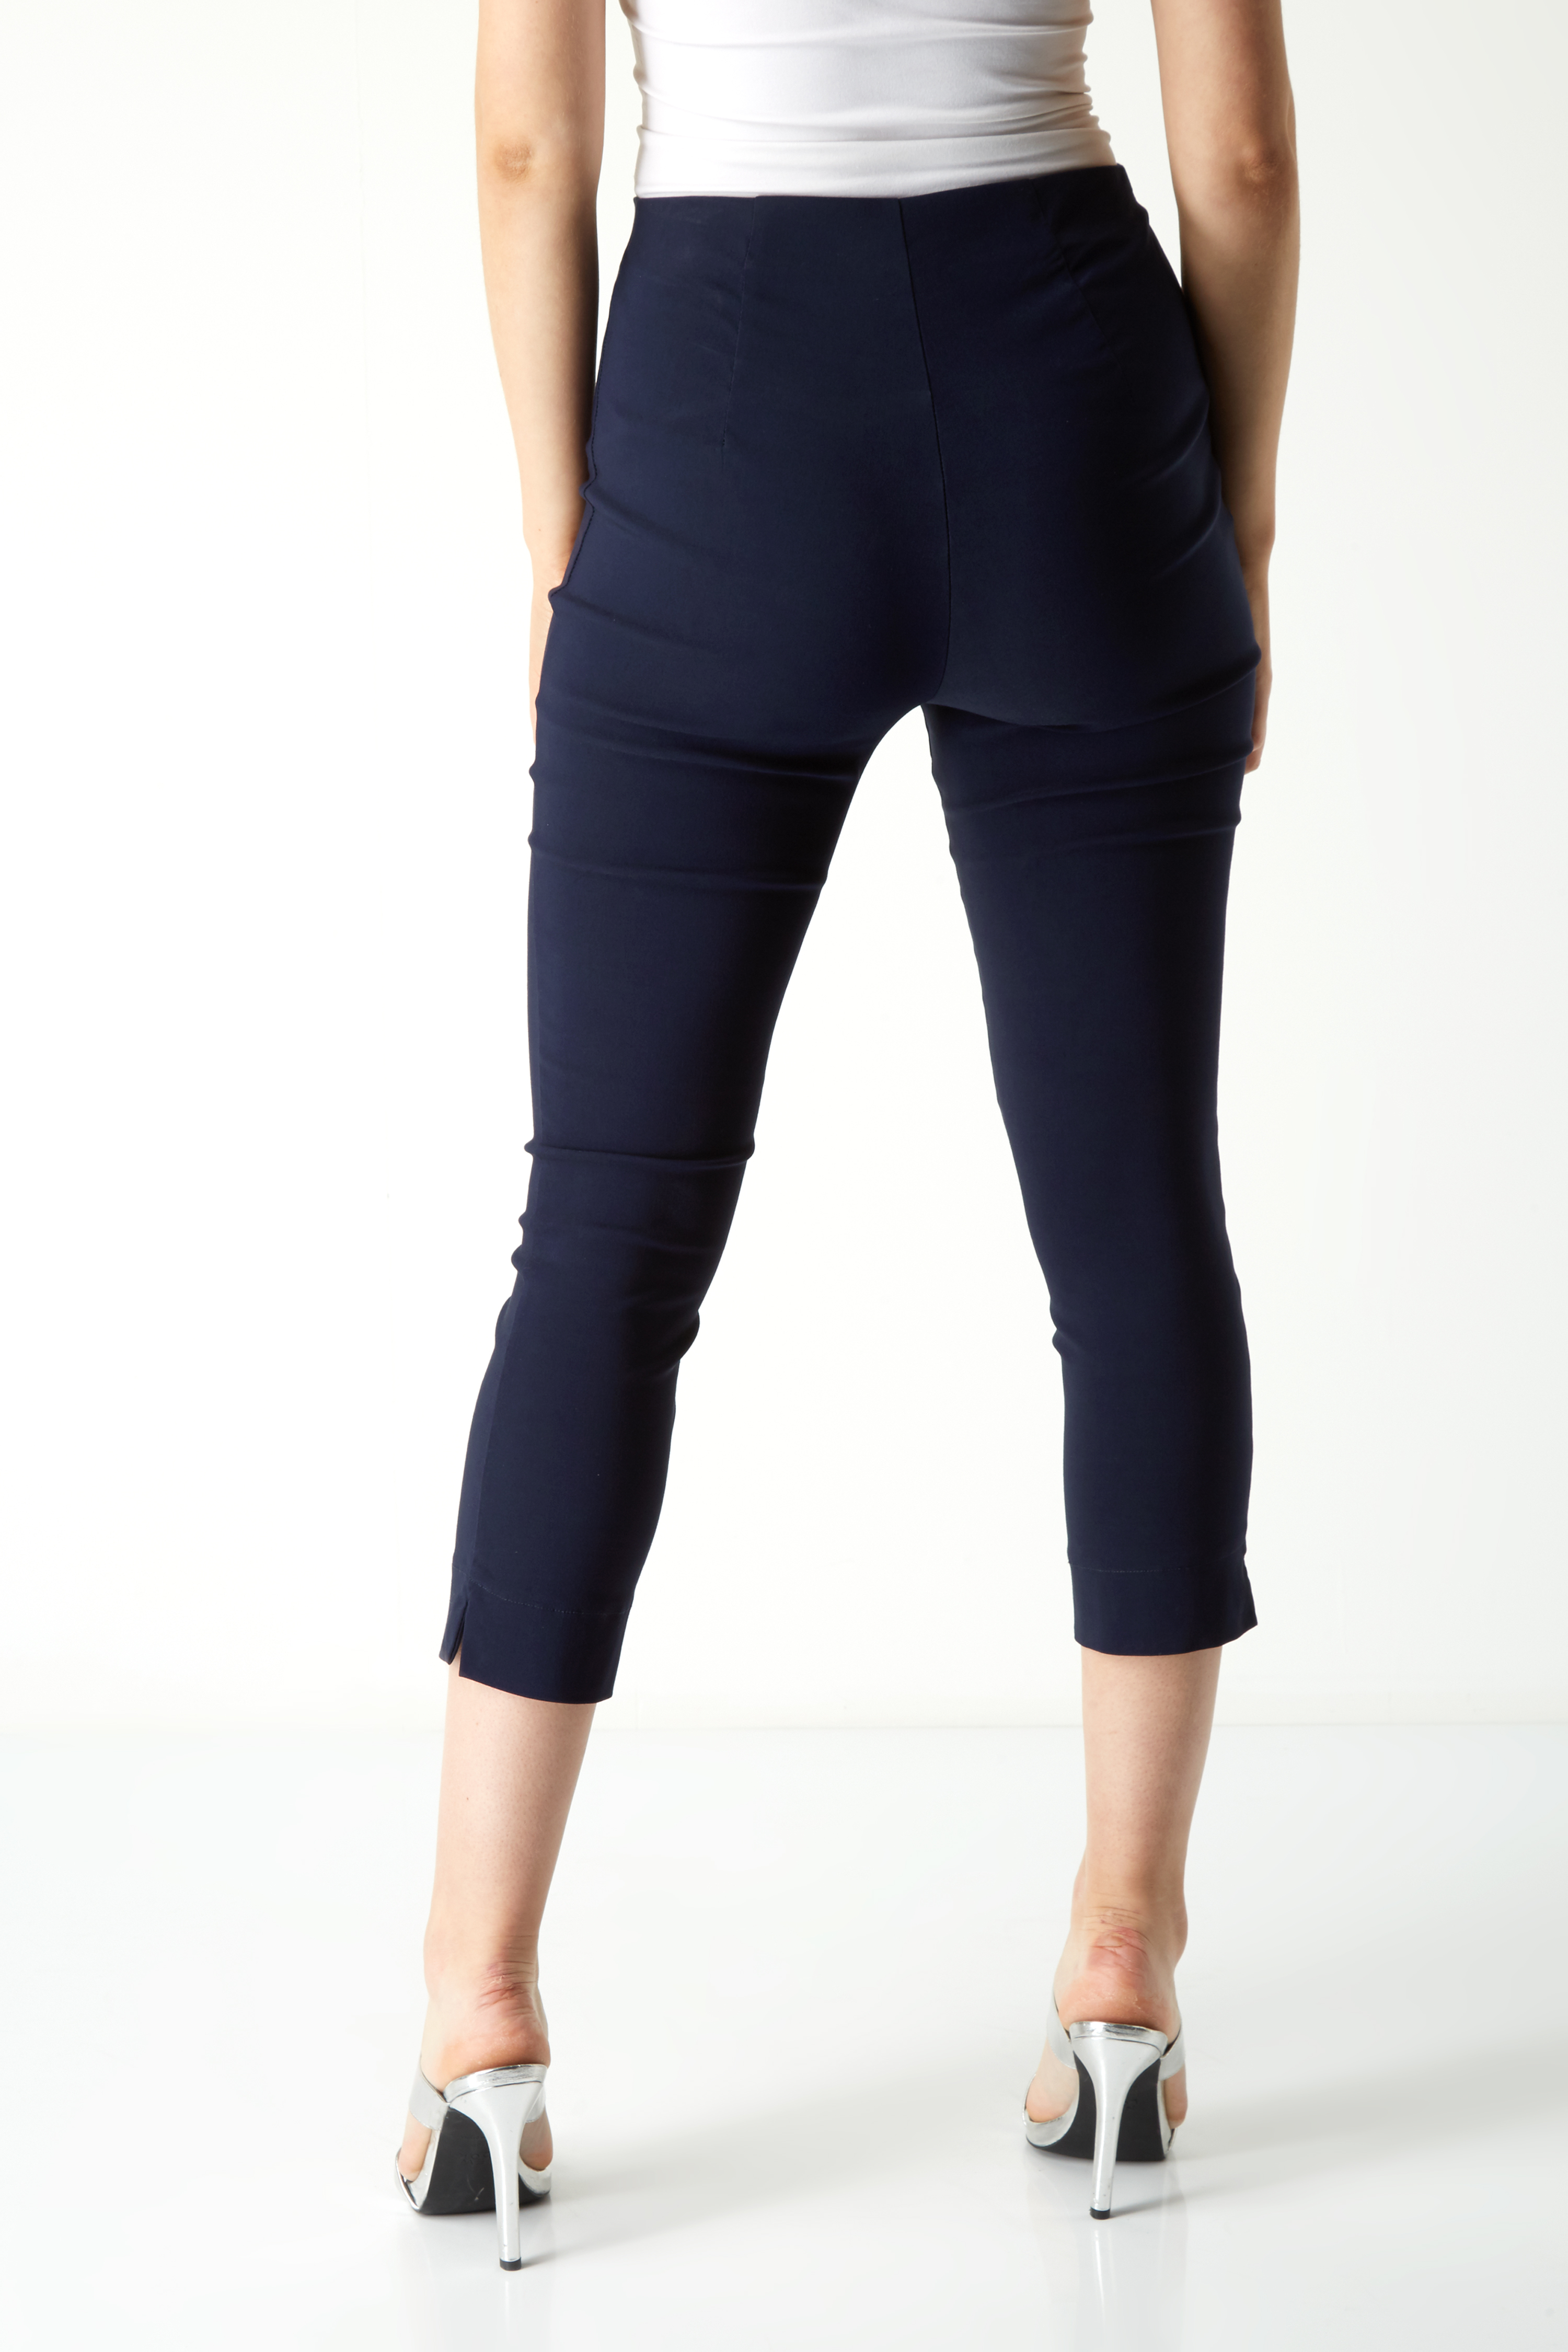 Navy Blue  Petite Cropped Stretch Trousers, Image 2 of 4